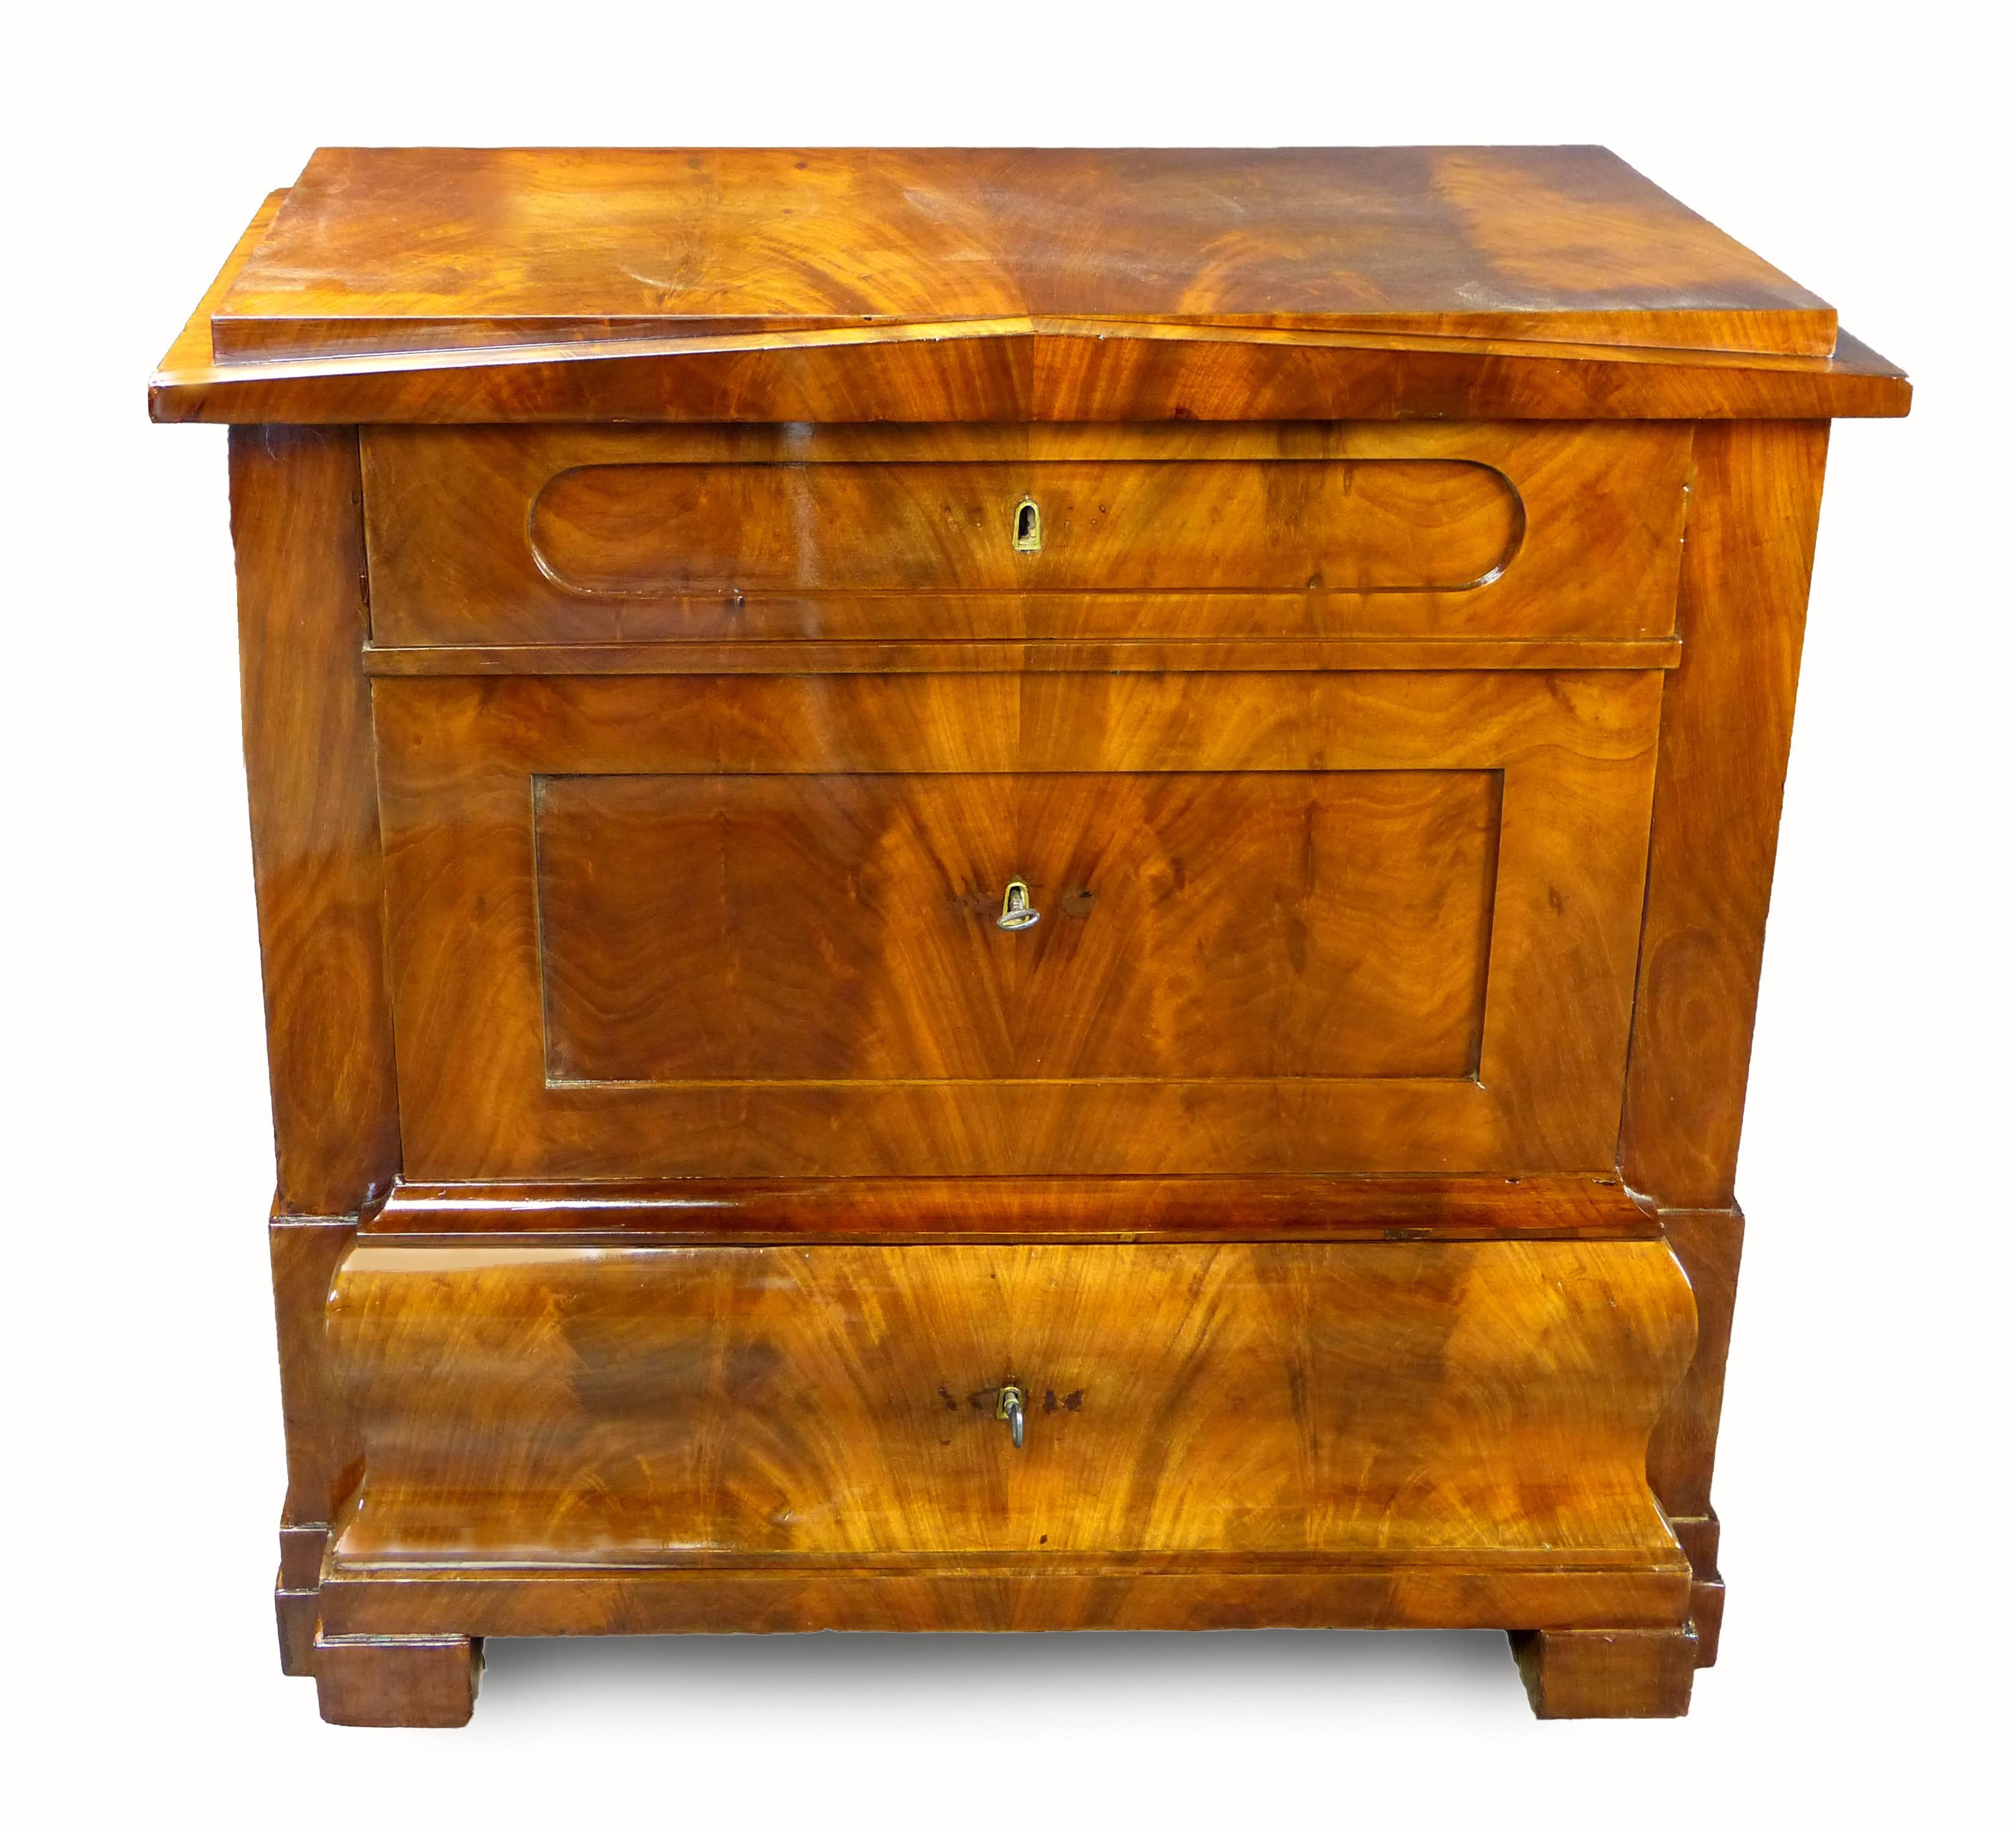 Fine Biedermeier period commode of architectural form with Schinkel pediment (after the famous Prussian architect). Three drawers of different size and form all with original locks and keys. The middle drawer deep enough to accommodate sheets or